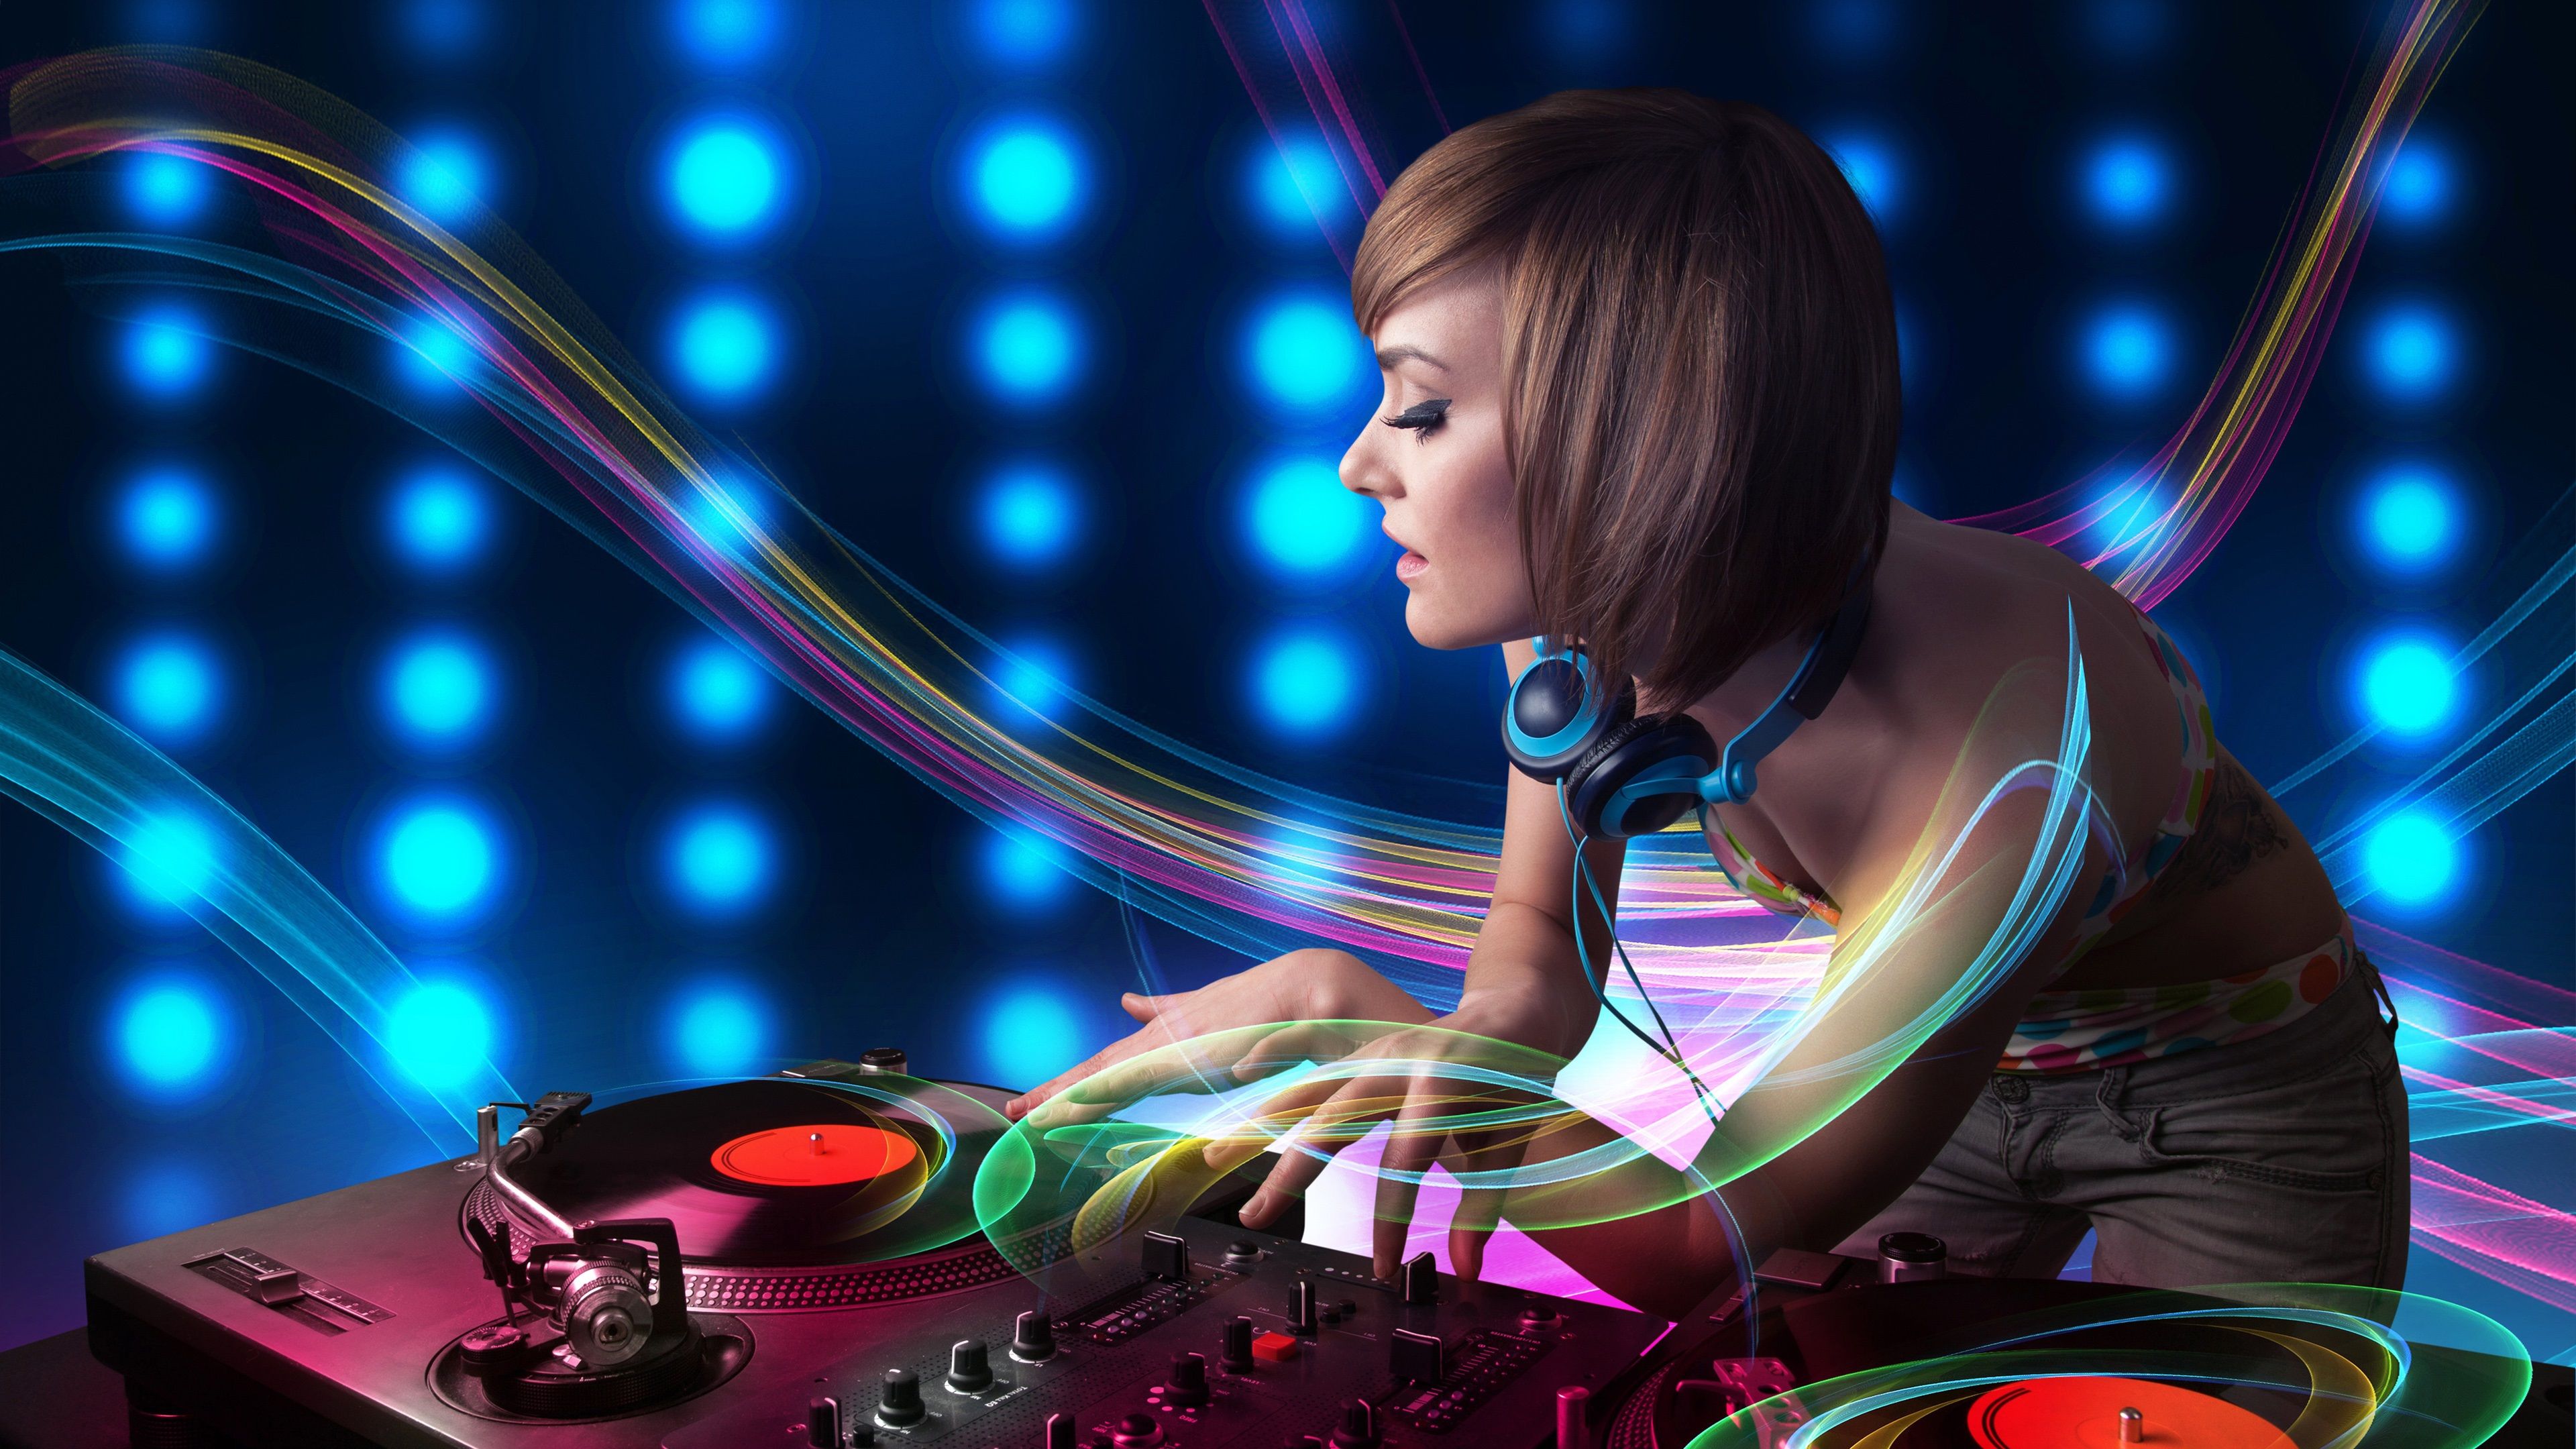 Wallpaper DJ, girl, abstraction lines, headphones, record, music theme 3840x2160 UHD 4K Picture, Image